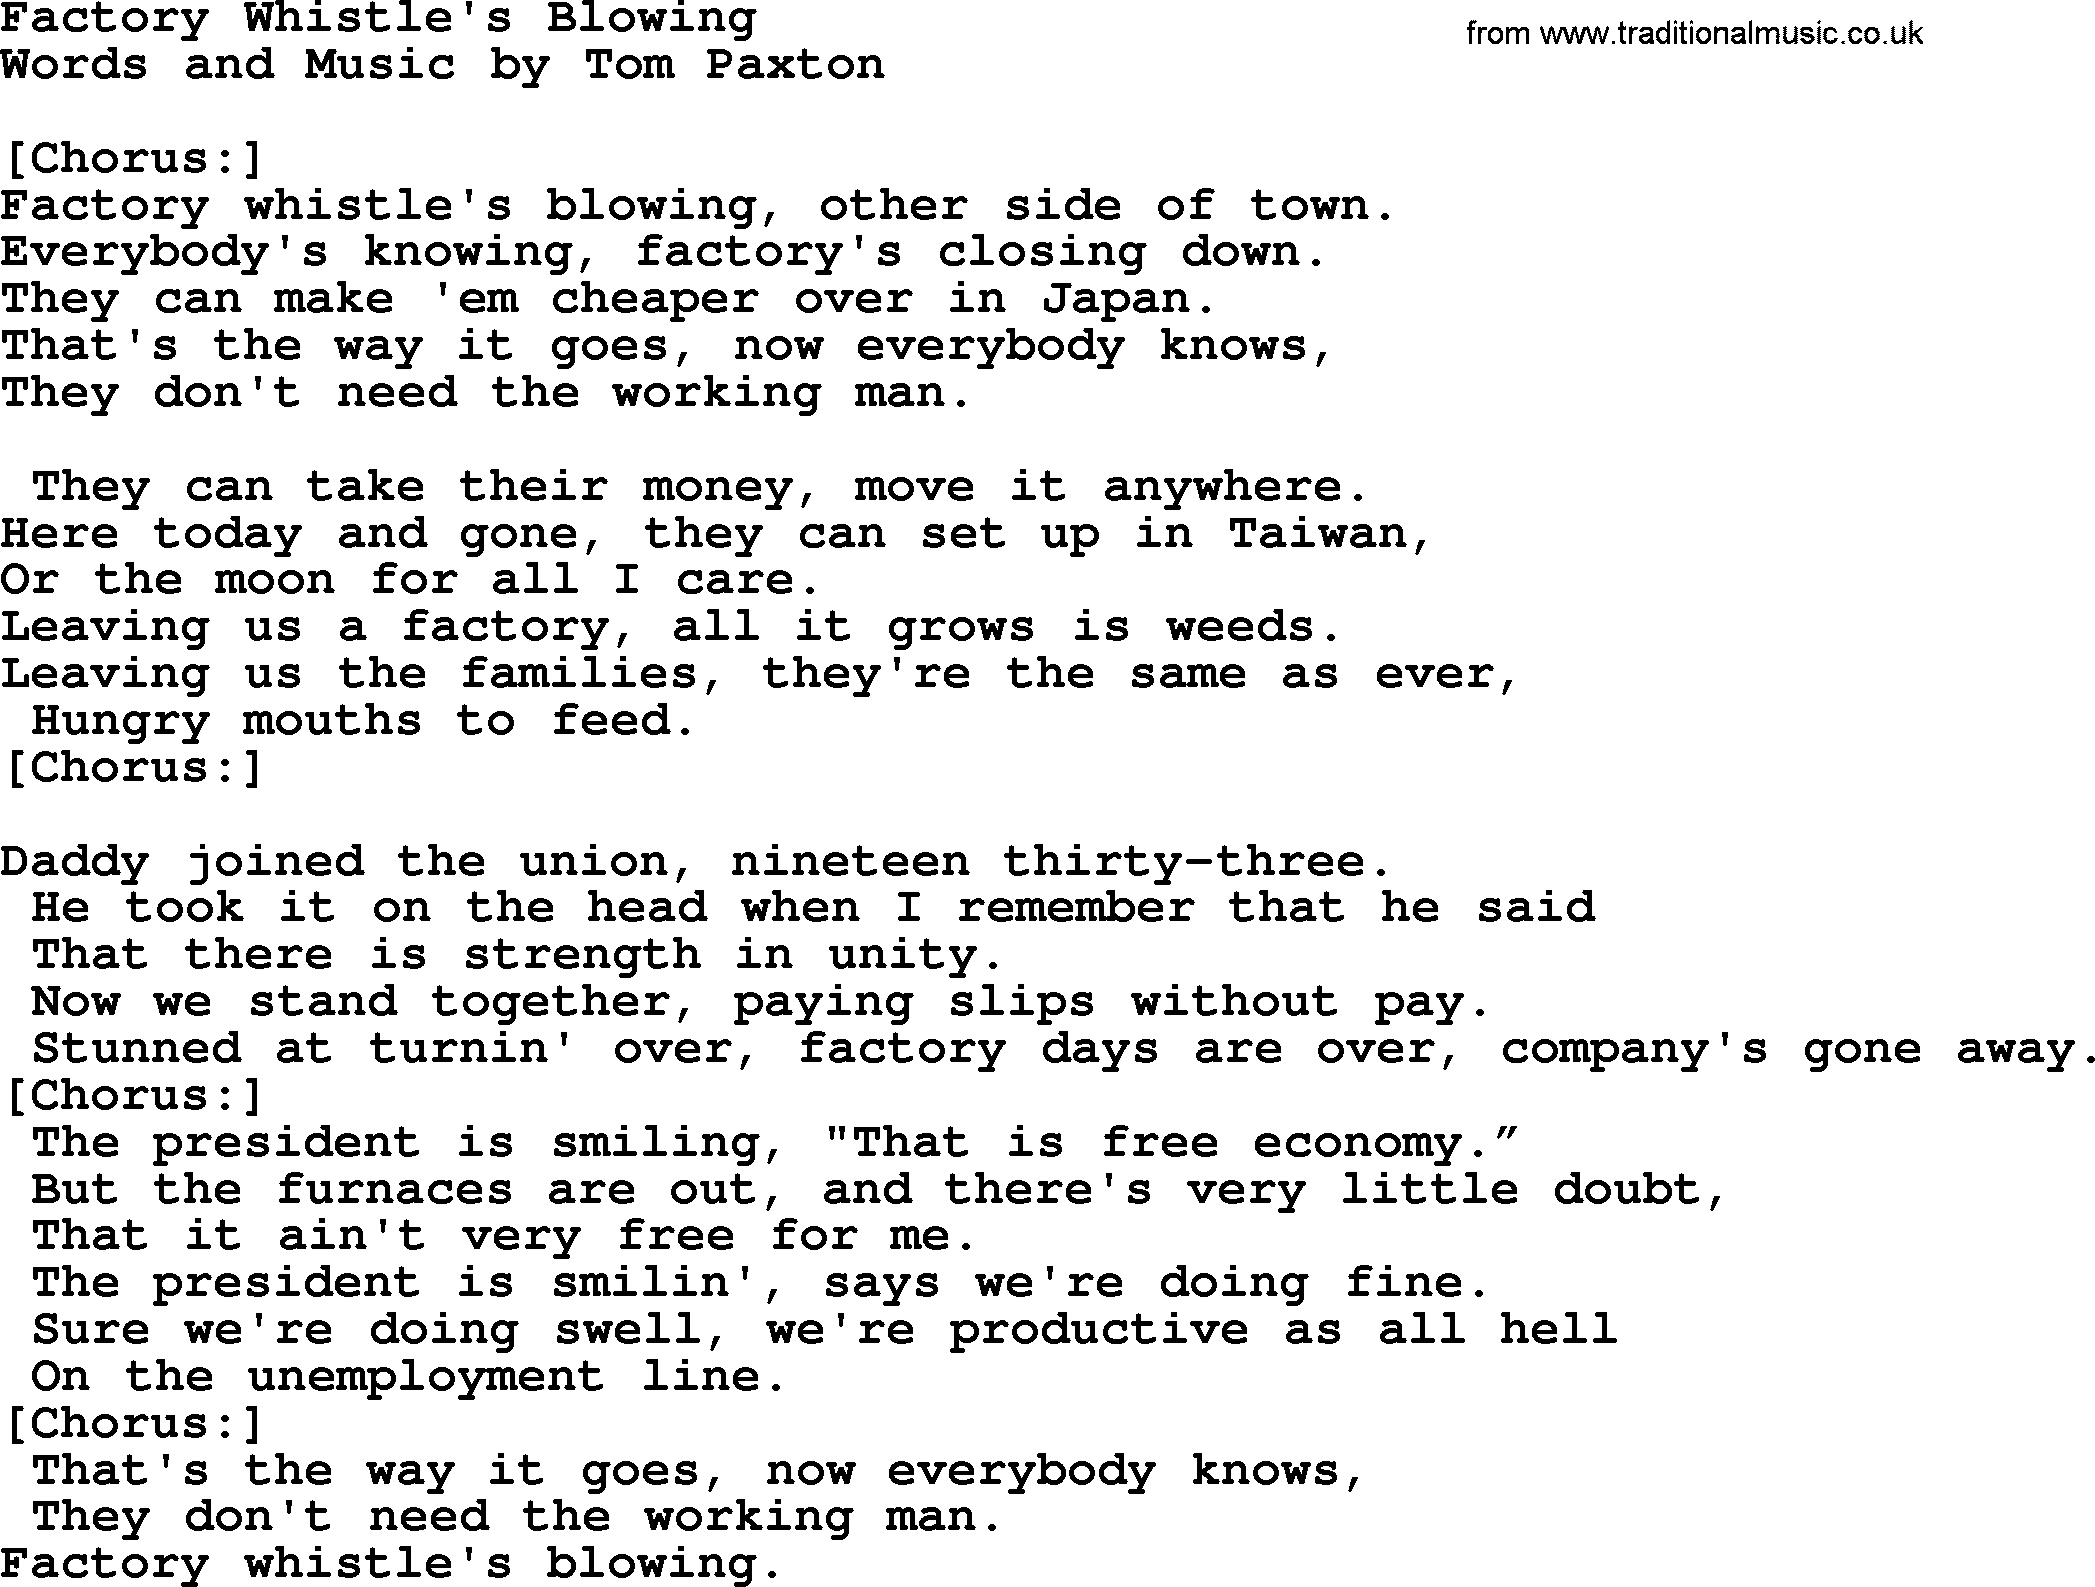 Tom Paxton song: Factory Whistle's Blowing, lyrics